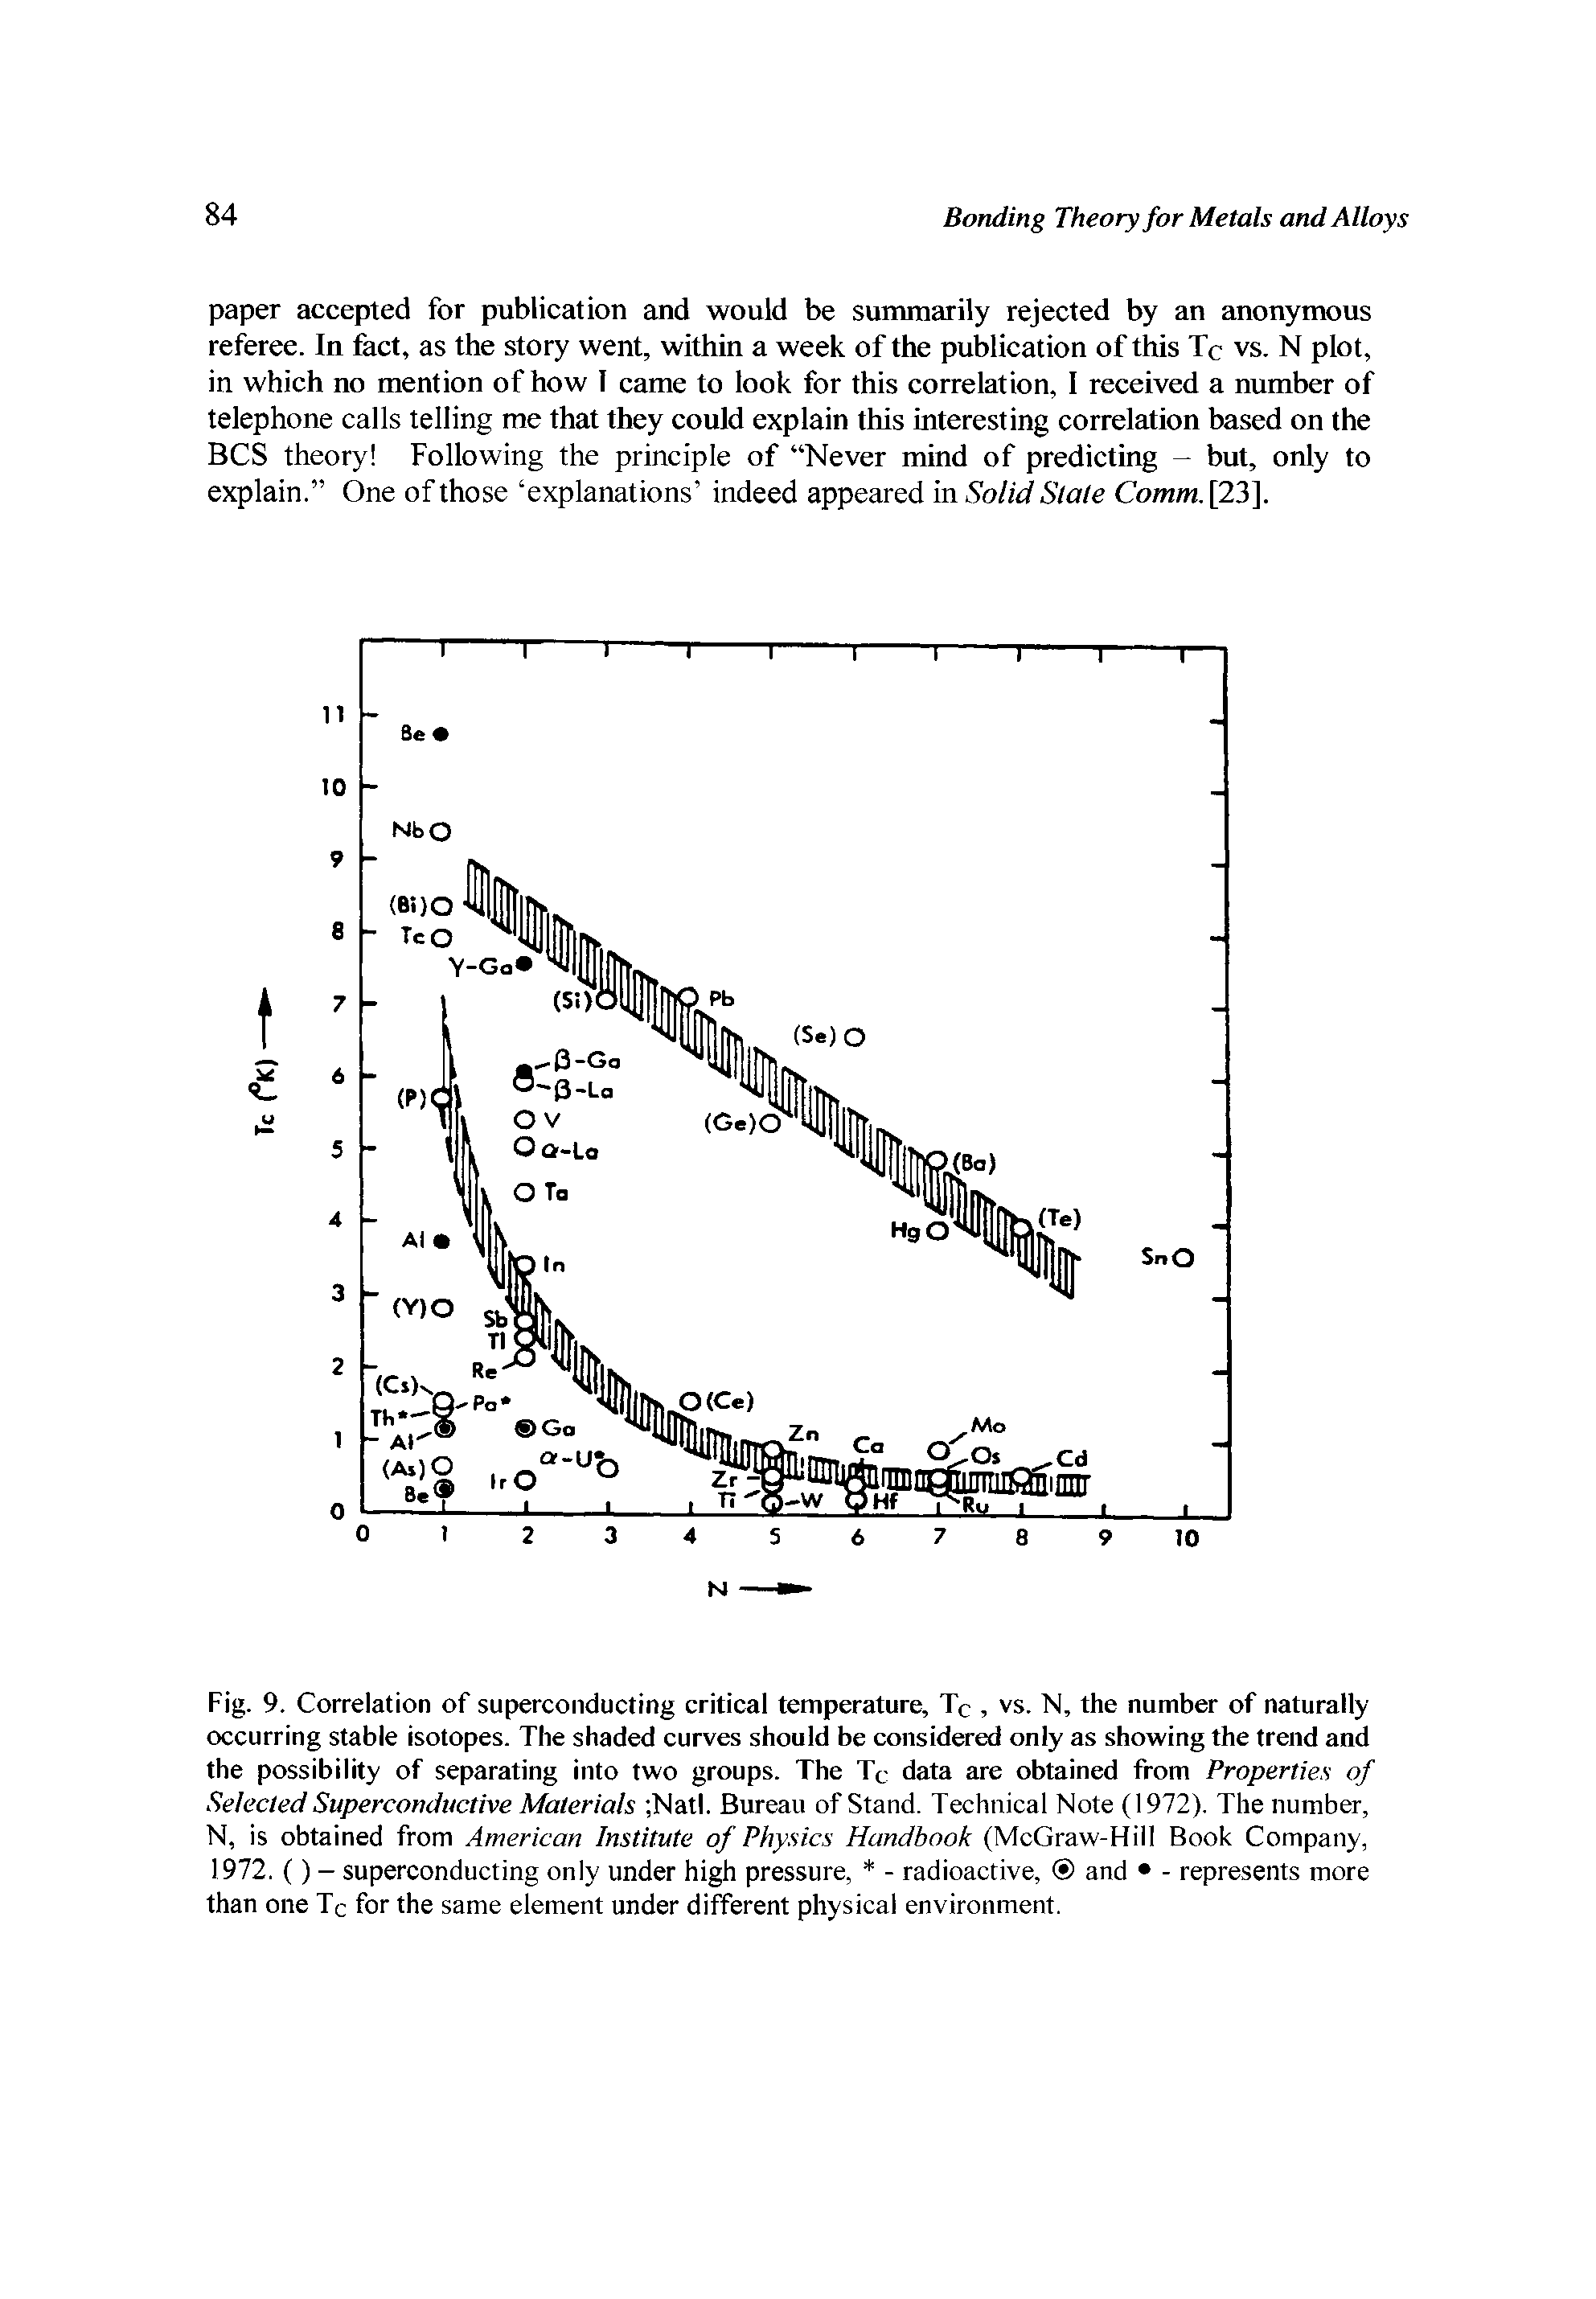 Fig. 9. Correlation of superconducting critical temperature, Tc, vs. N, the number of naturally-occurring stable isotopes. The shaded curves should be considered only as showing the trend and the possibility of separating into two groups. The Tc data are obtained from Properties of Selected Superconductive Materials Natl. Bureau of Stand. Technical Note (1972). The number, N, is obtained from American Institute of Physics Handbook (McGraw-Hill Book Company, 1972. () - superconducting only under high pressure, - radioactive, and - represents more than one Tc for the same element under different physical environment.